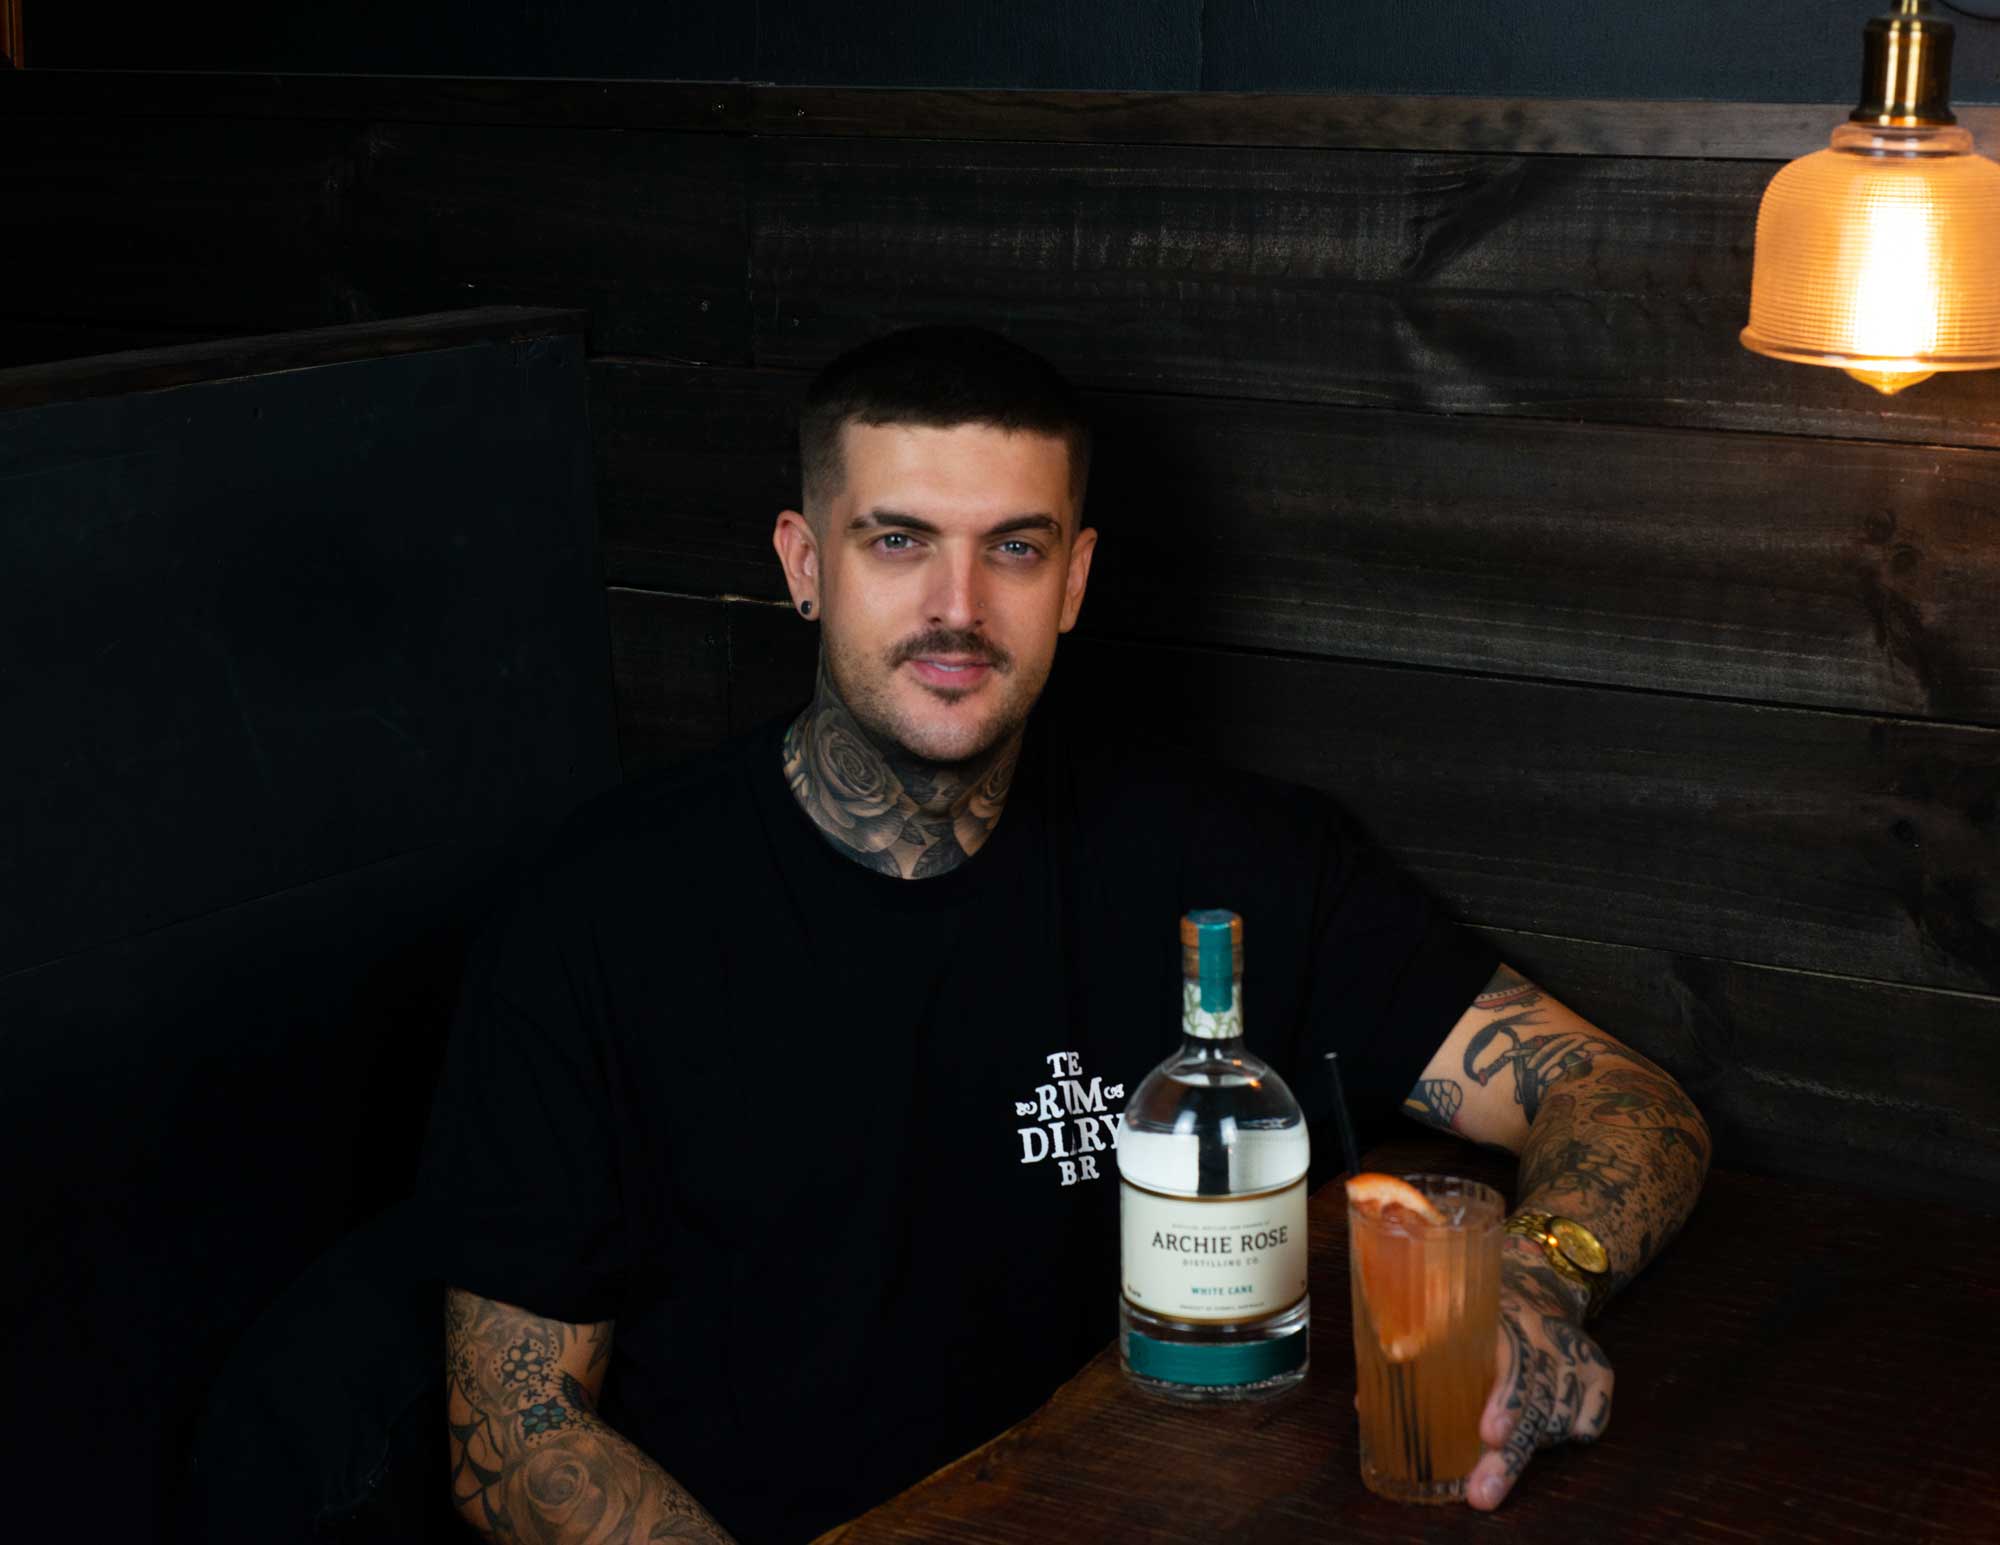 You can find Archie Rose White Cane at The Rum Diary Bar in Melbourne. Photo: Supplied